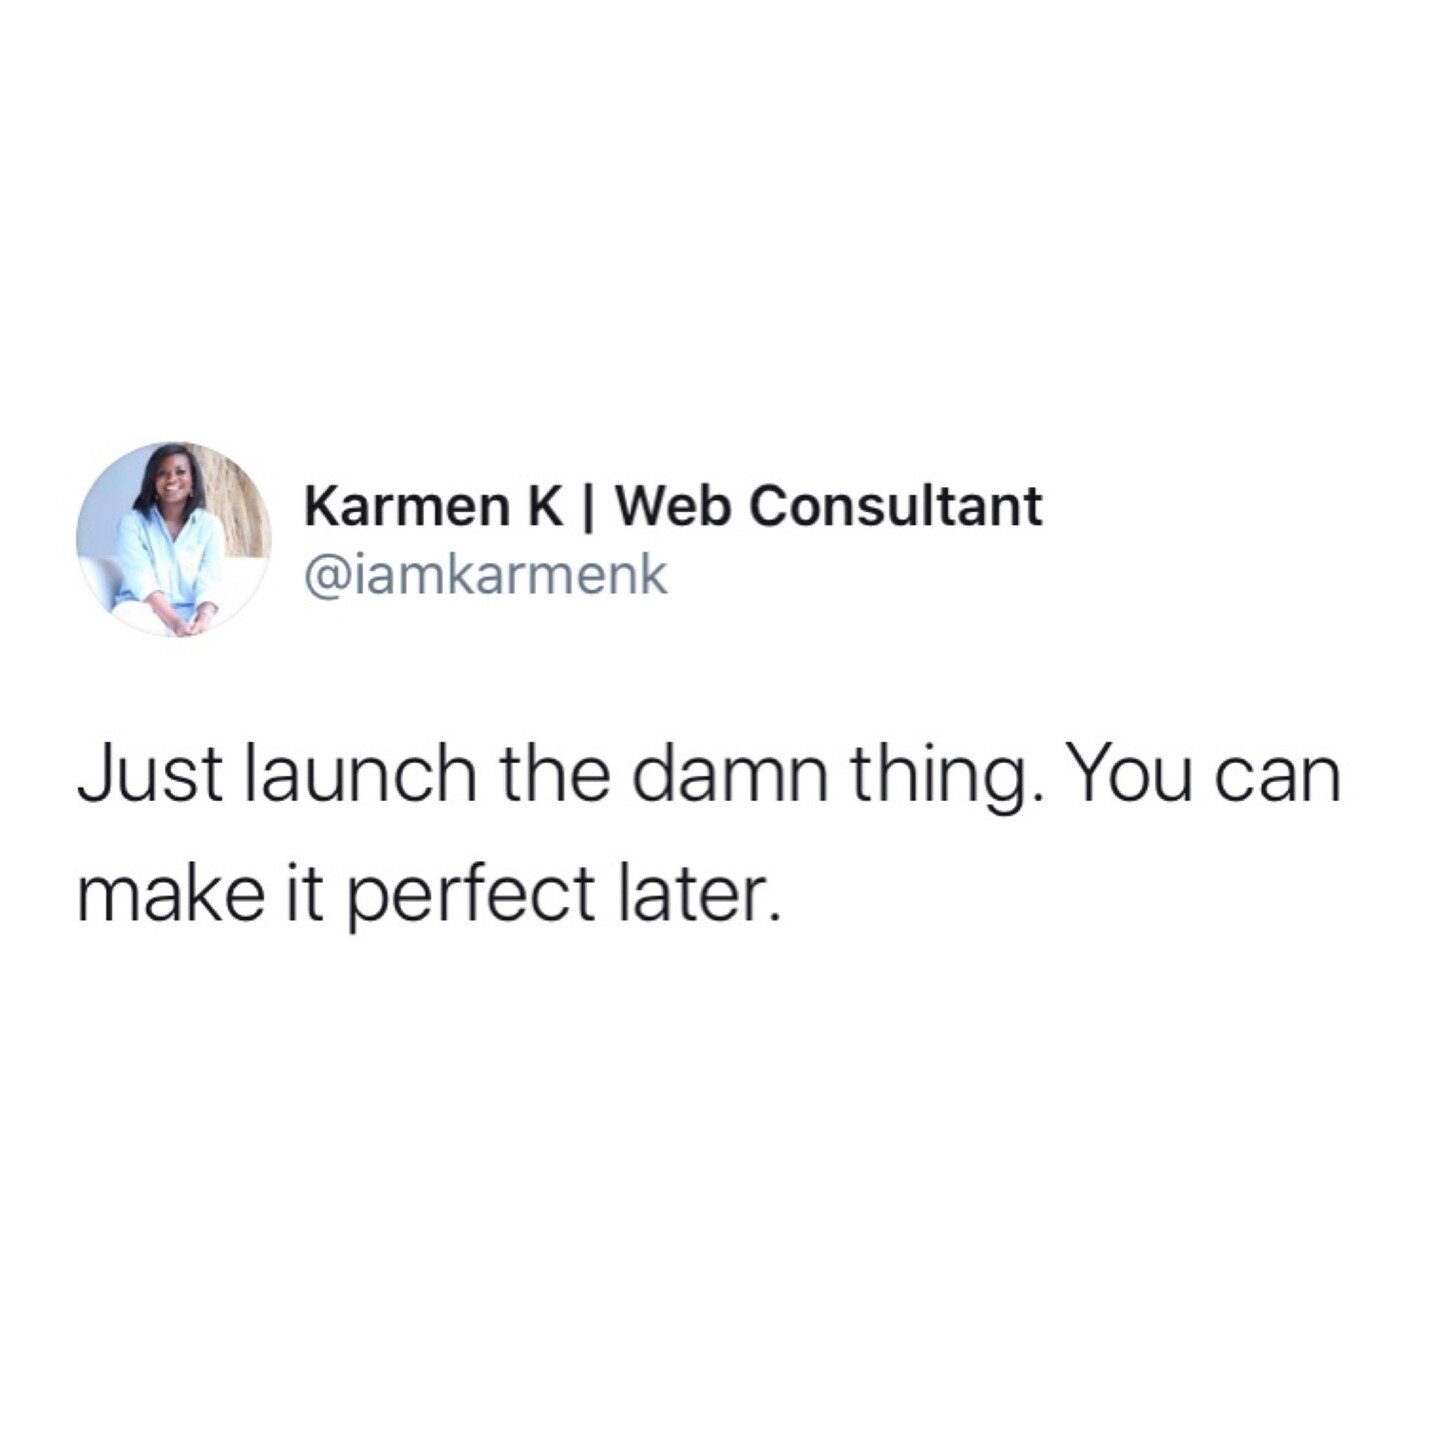 You don't need perfect conditions to start, you need yourself. Just go for it. ⁠
⁠
Credit: @iamkarmenk